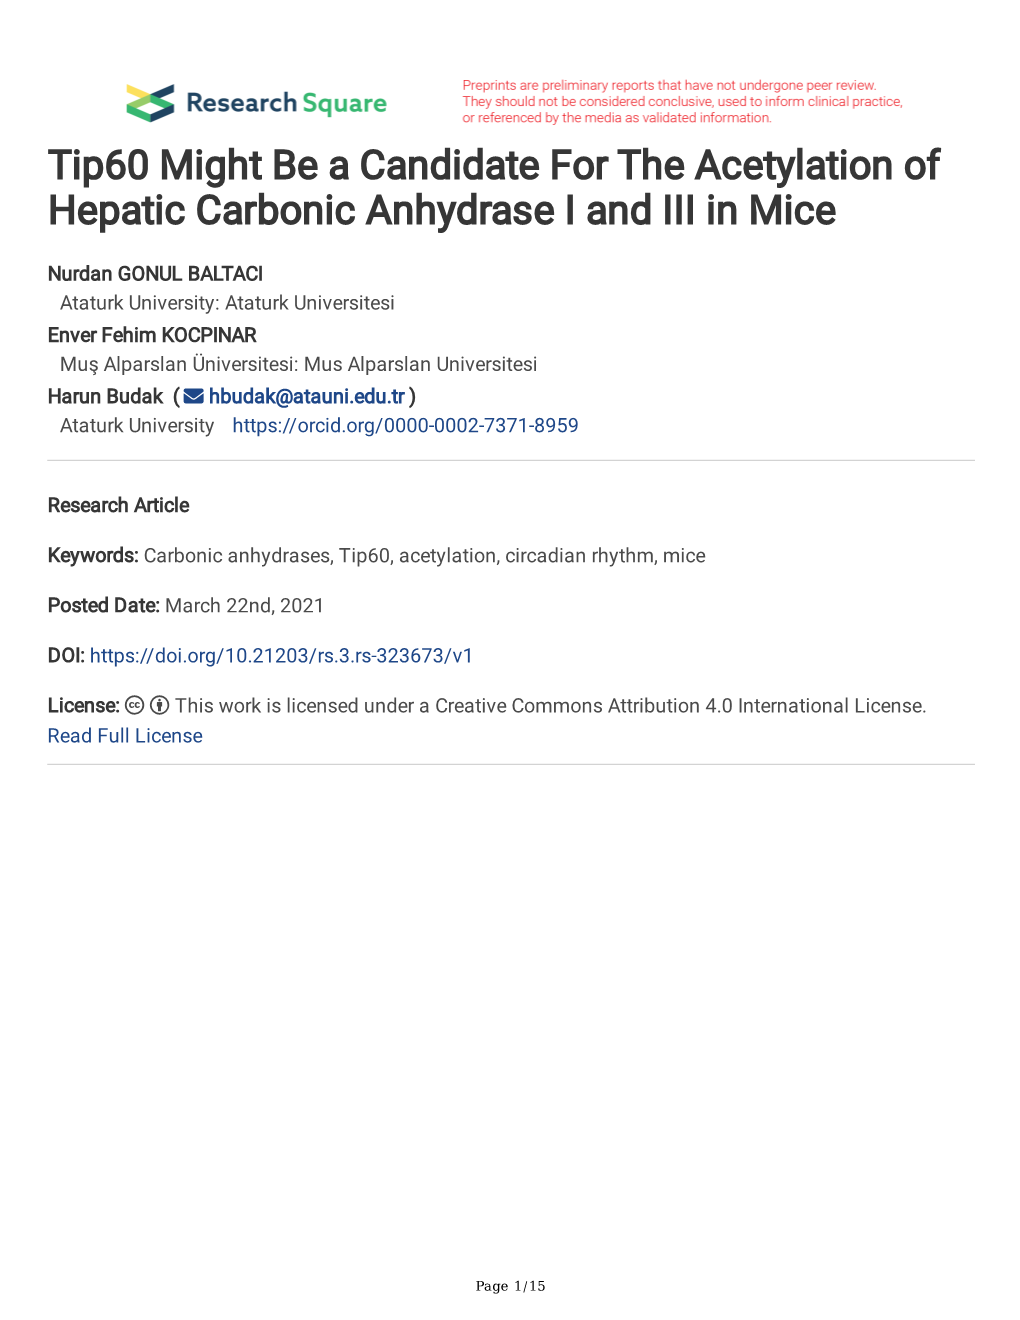 Tip60 Might Be a Candidate for the Acetylation of Hepatic Carbonic Anhydrase I and III in Mice